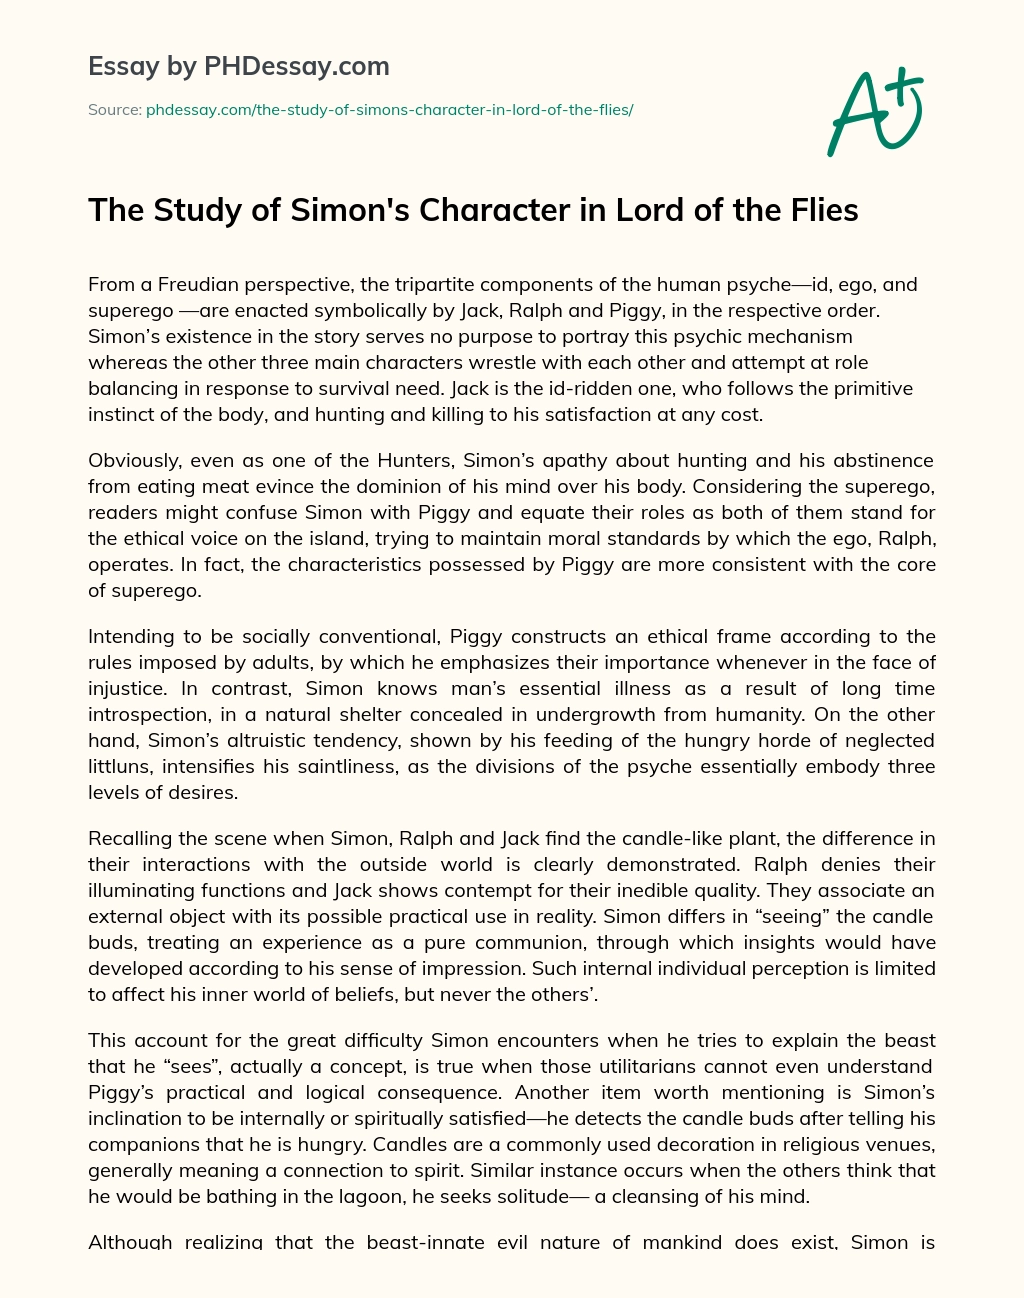 The Study of Simon’s Character in Lord of the Flies essay